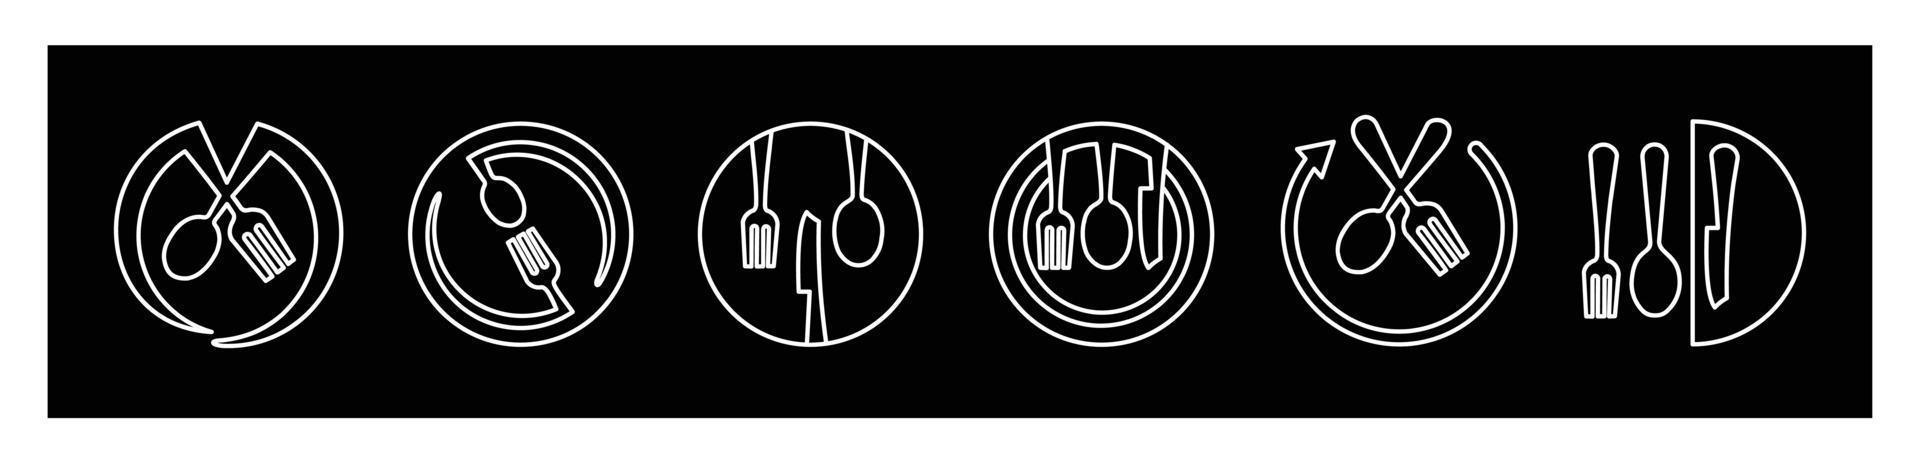 Tableware Vector illustration spoon, Fork, knife, and plate icon set in line style, Dinner service collection form on black background